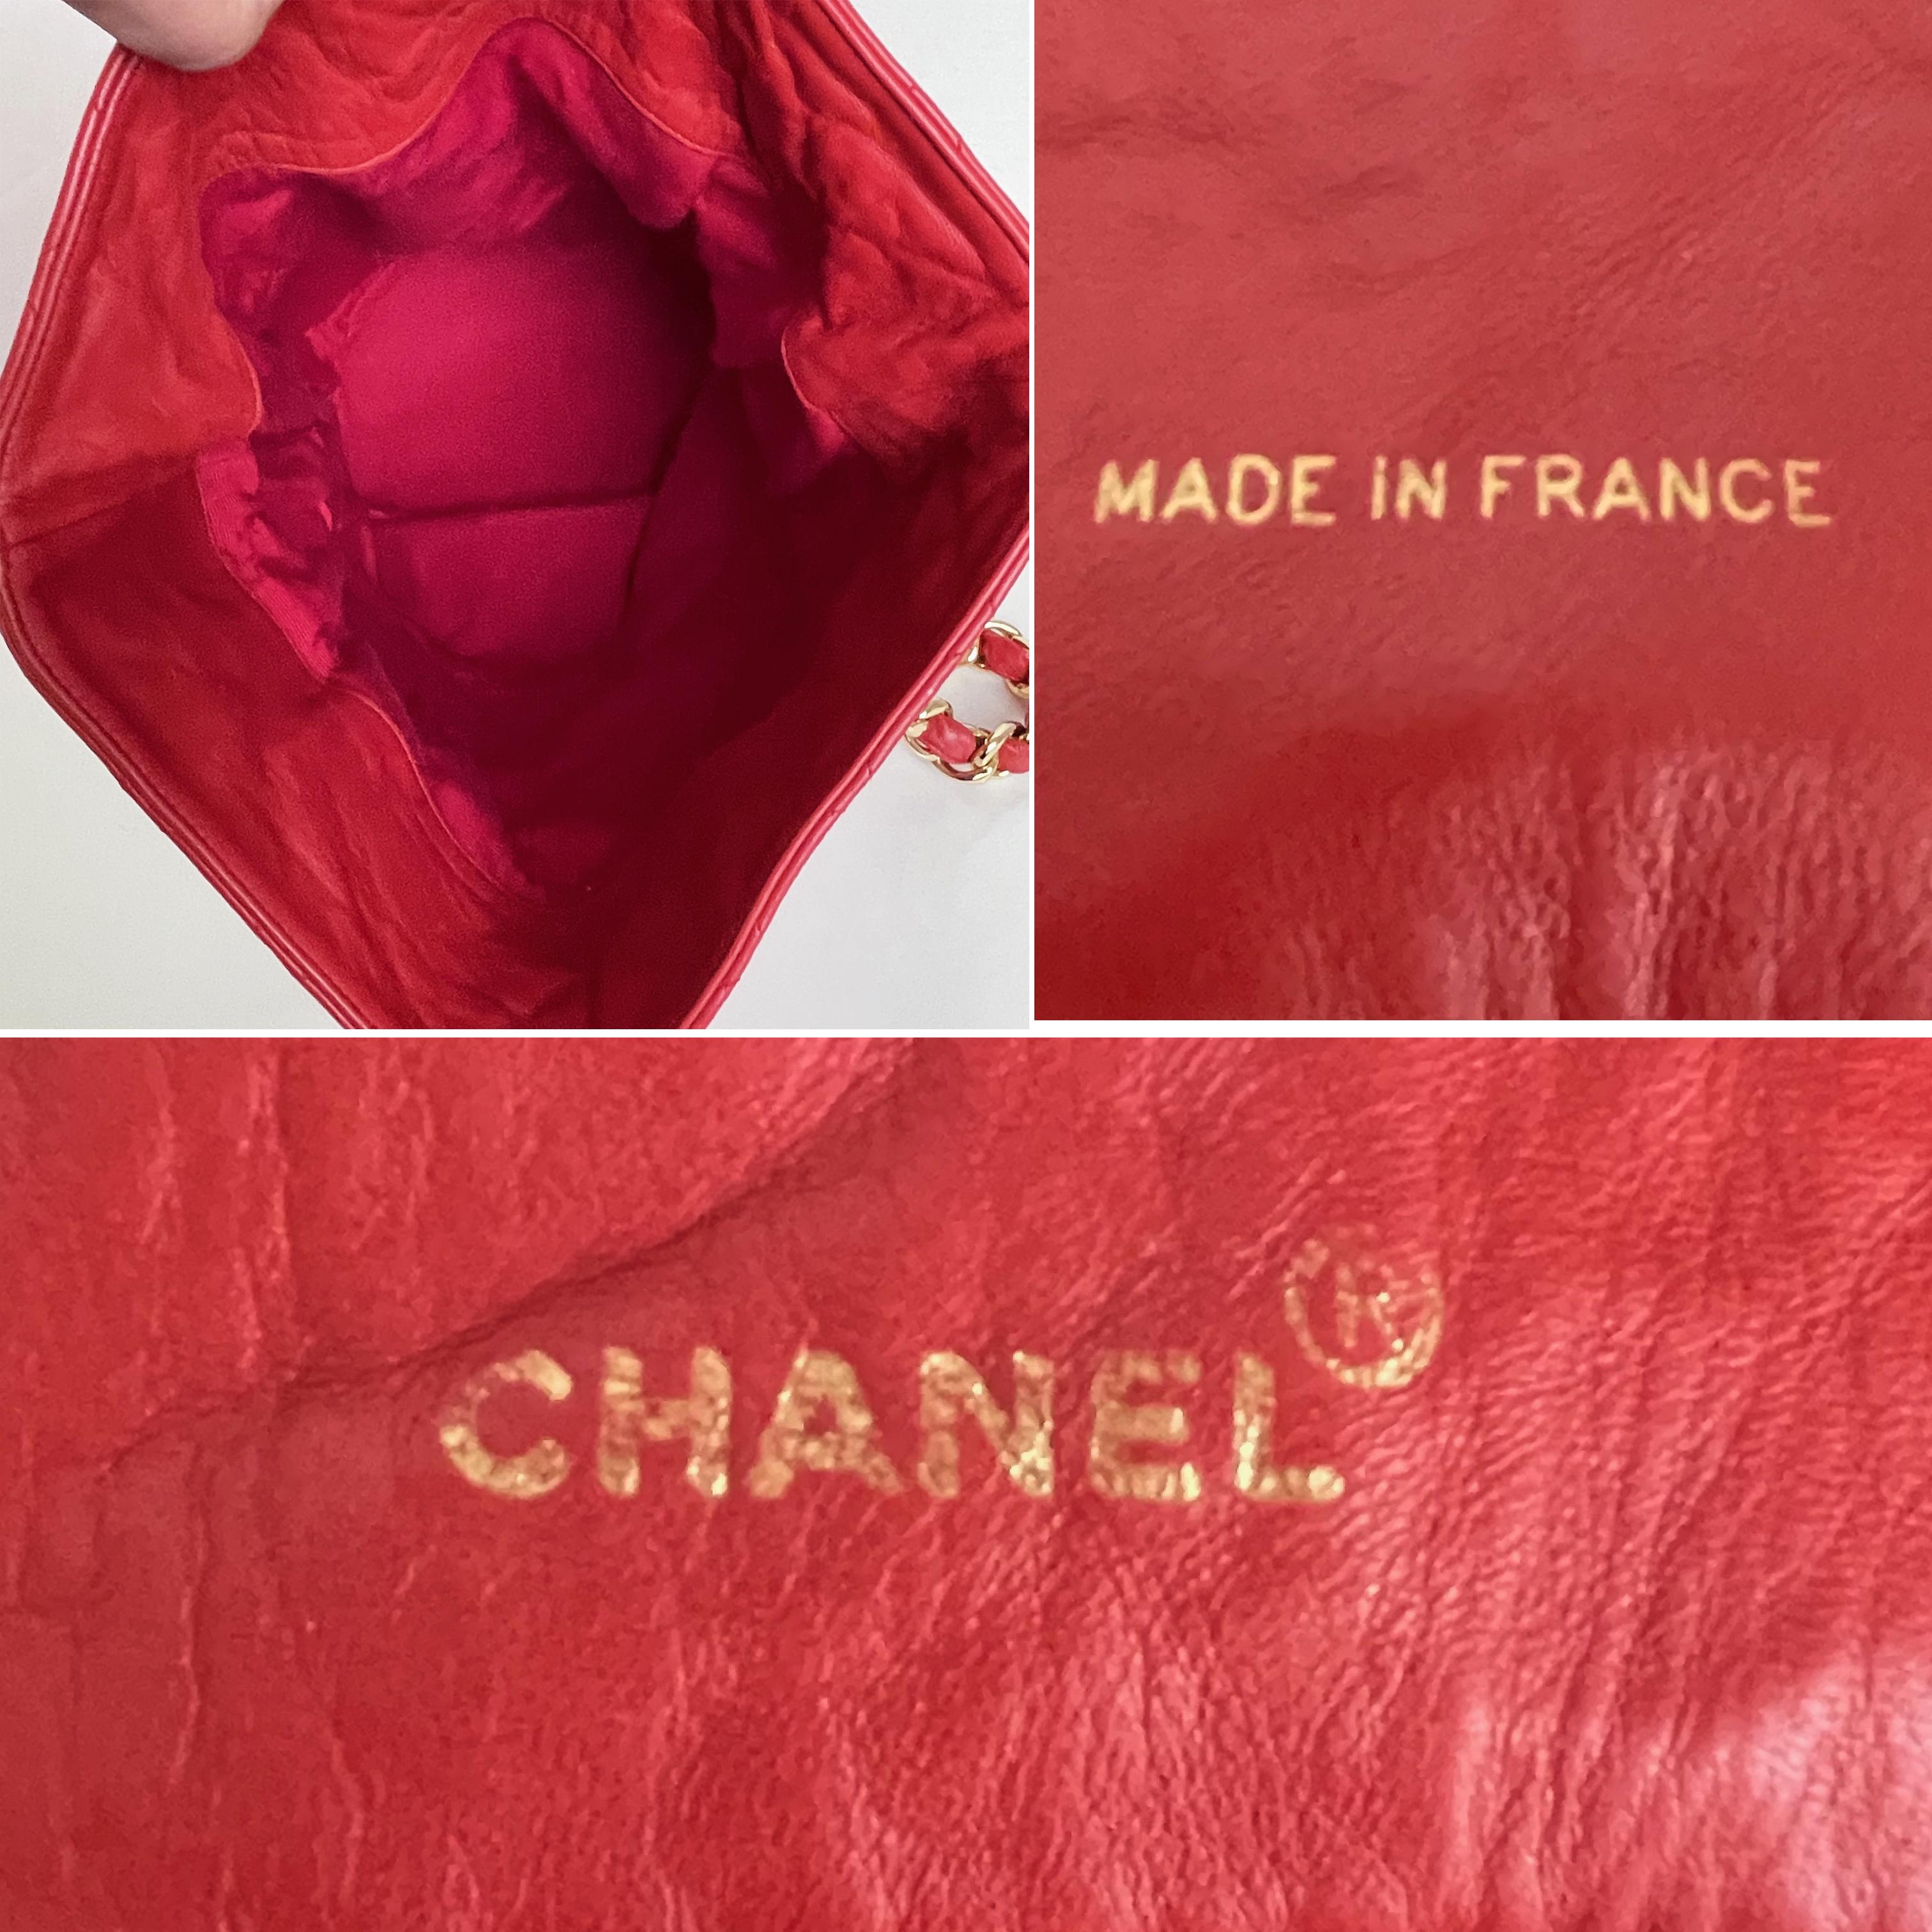 Vintage Chanel Buckle Bag Red Matelasse Leather with Chain Strap F/W 1992 Rare For Sale 6